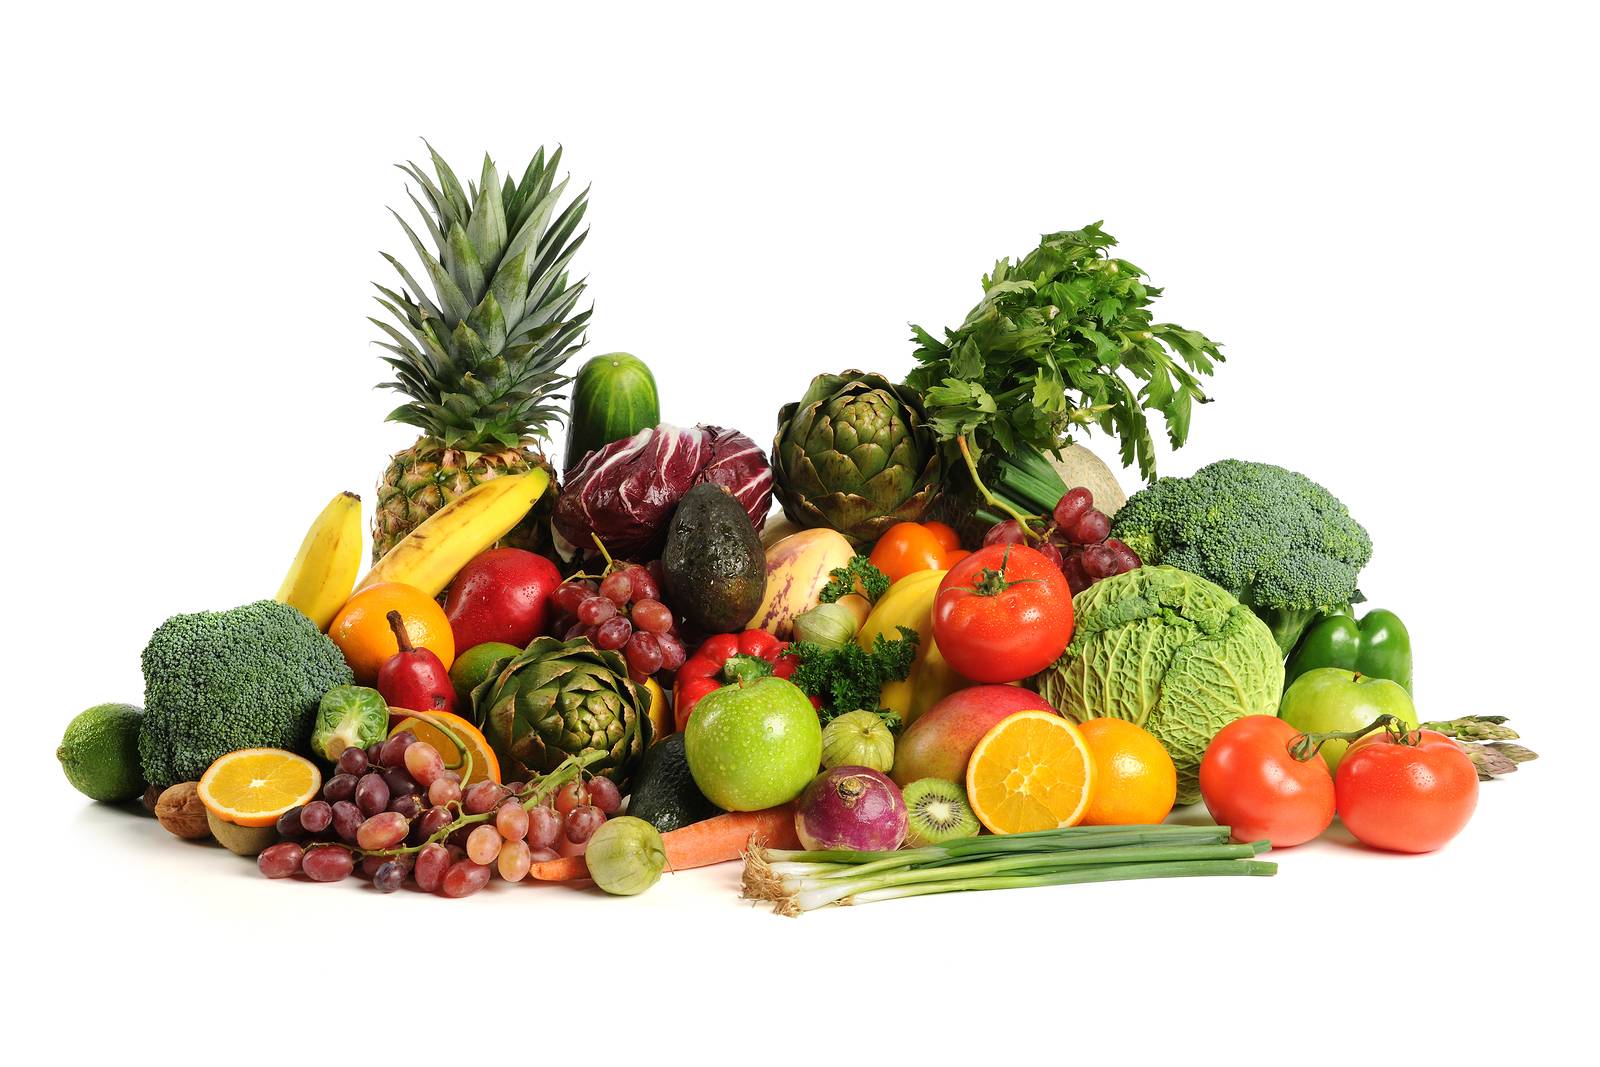 Fruits And Vegetables Wallpaper